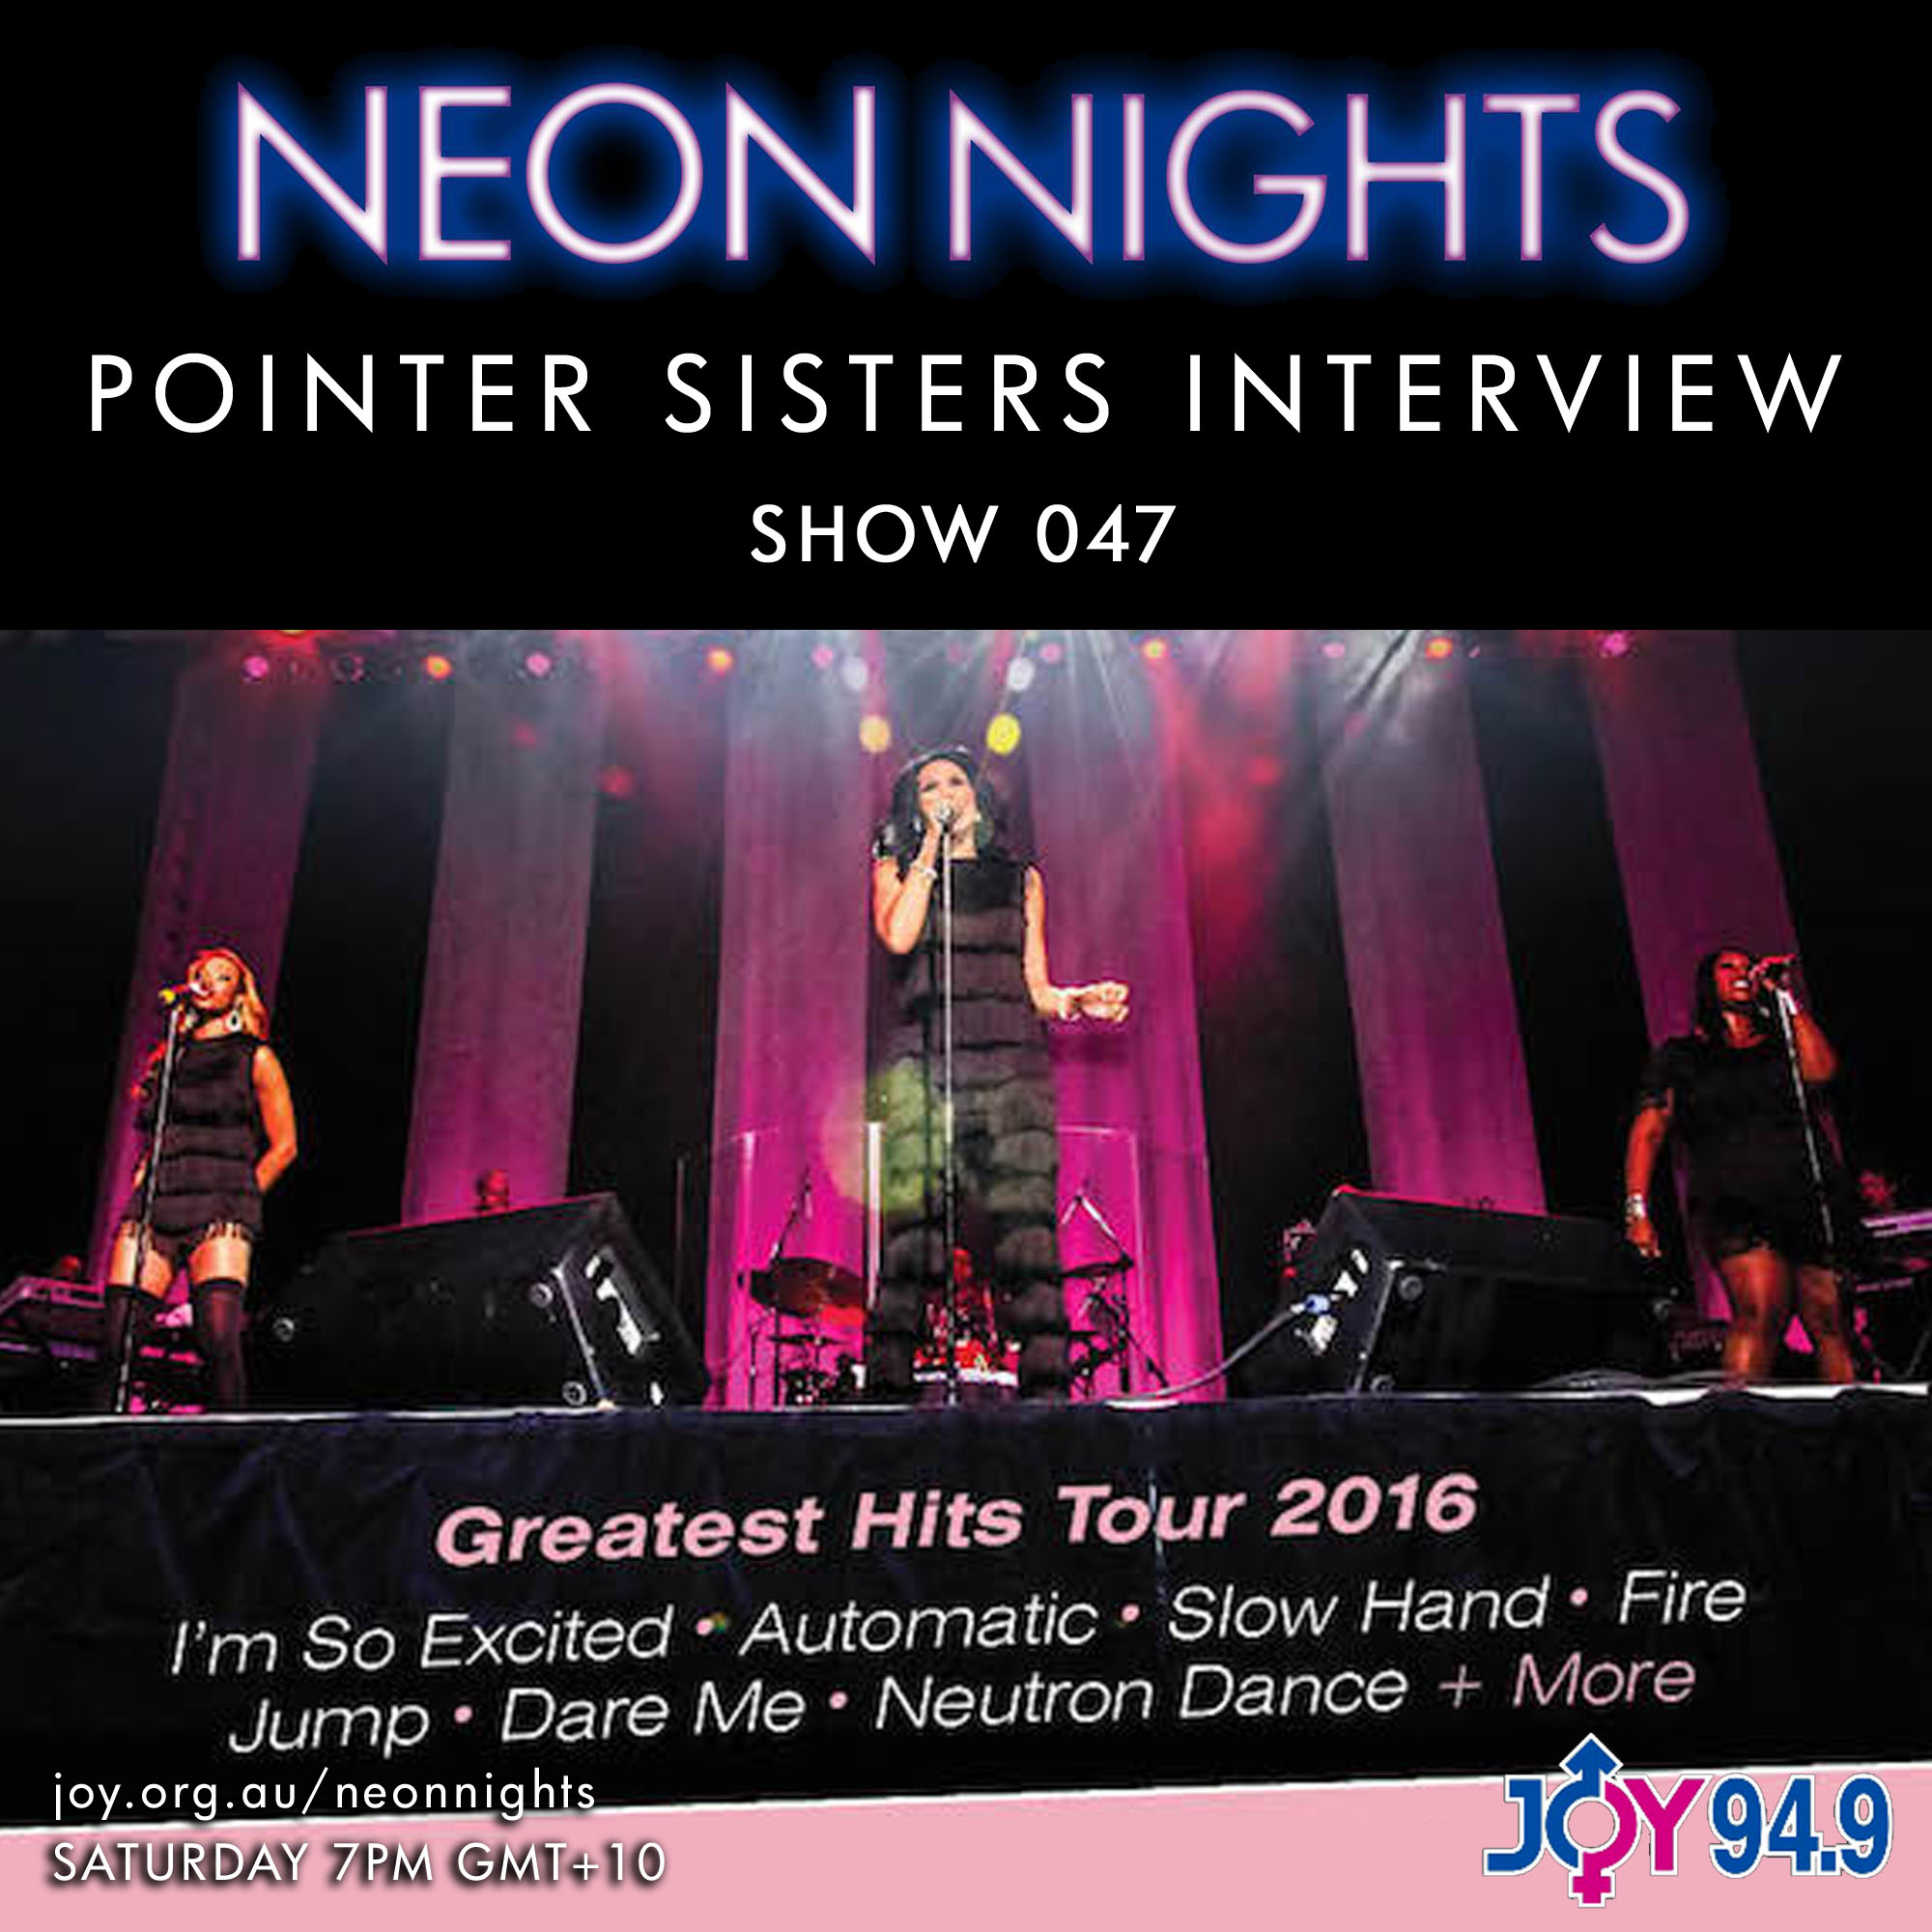 Show 047 Pointer Sisters Chat Neon Nights